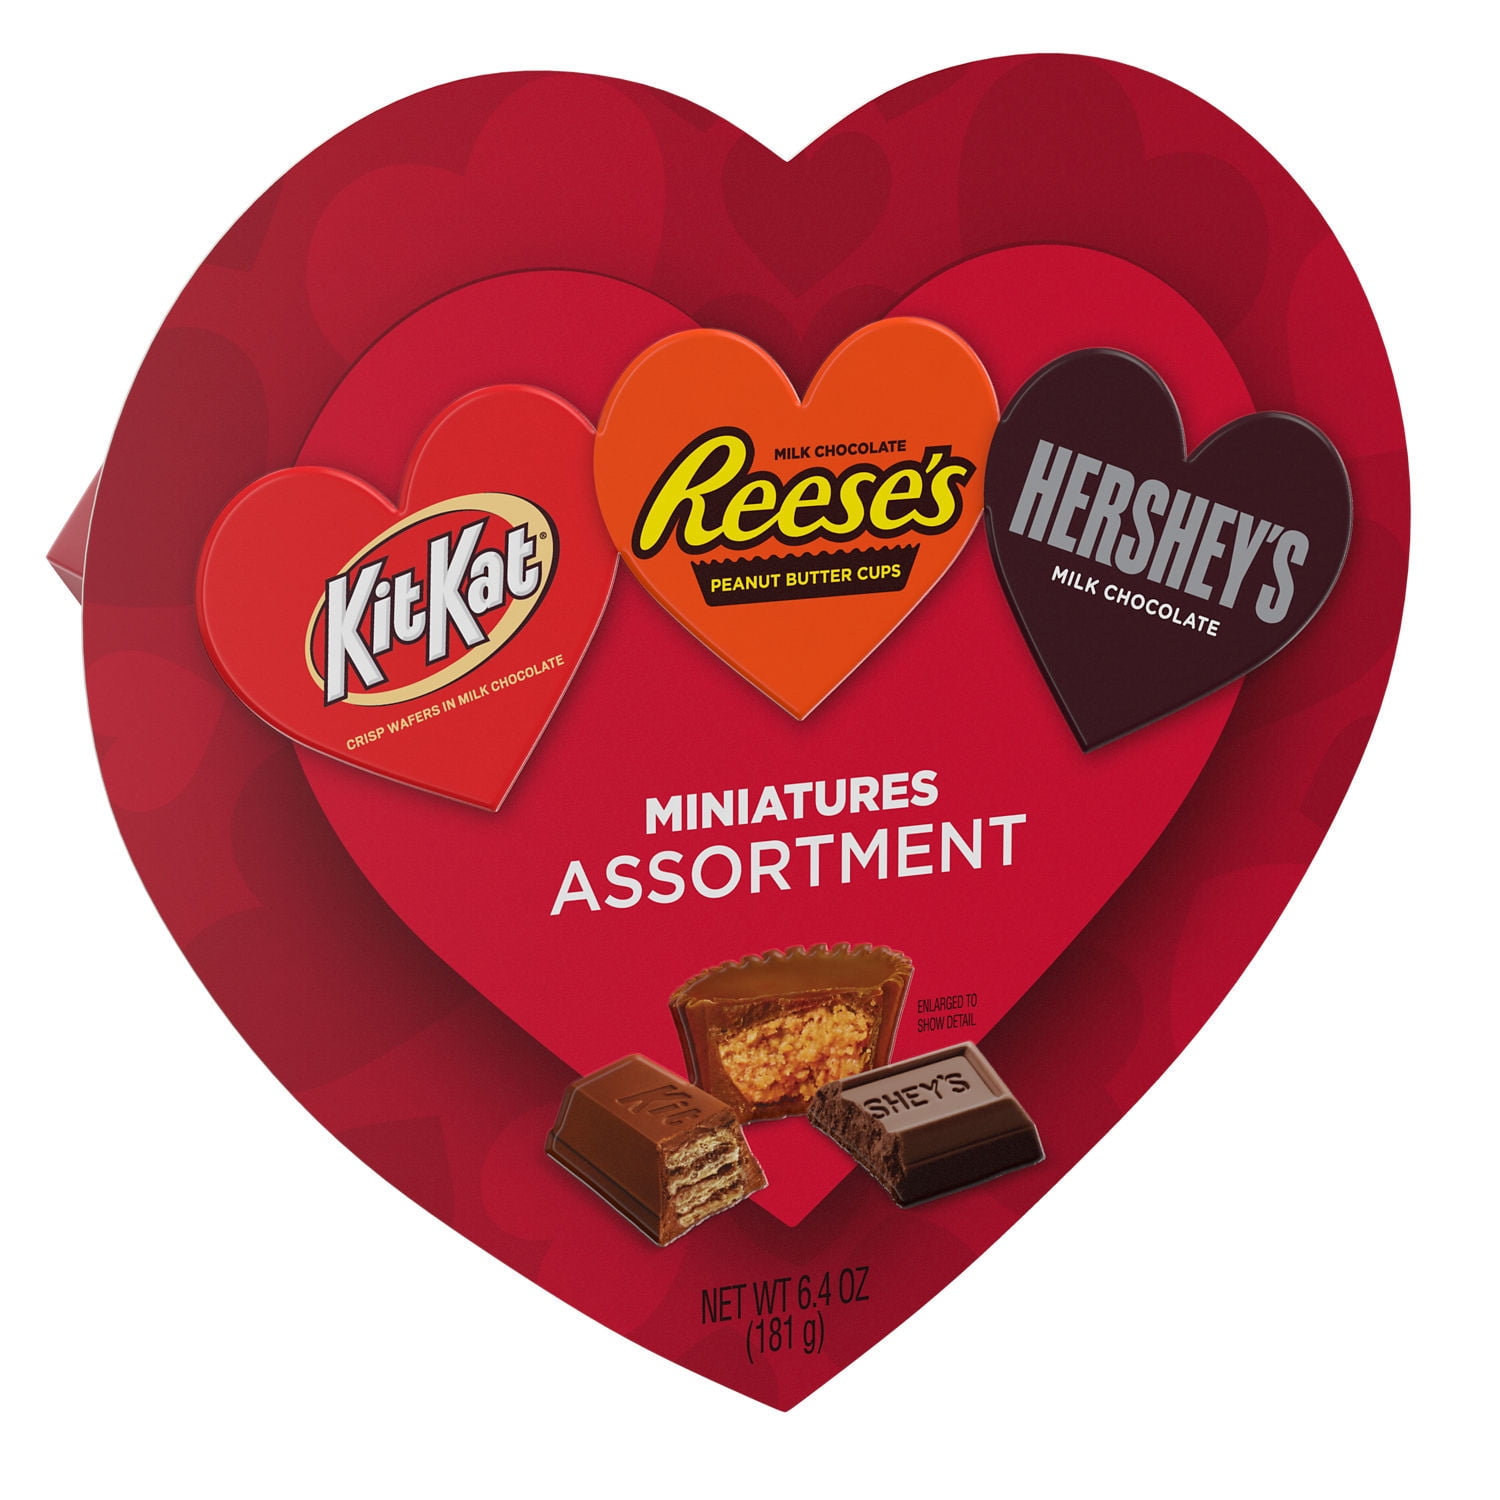 HERSHEY'S, KIT KAT® and REESE'S, Miniatures Milk Chocolate Assortment Candy, Valentine's Day, 6.4 oz, Heart Gift Box